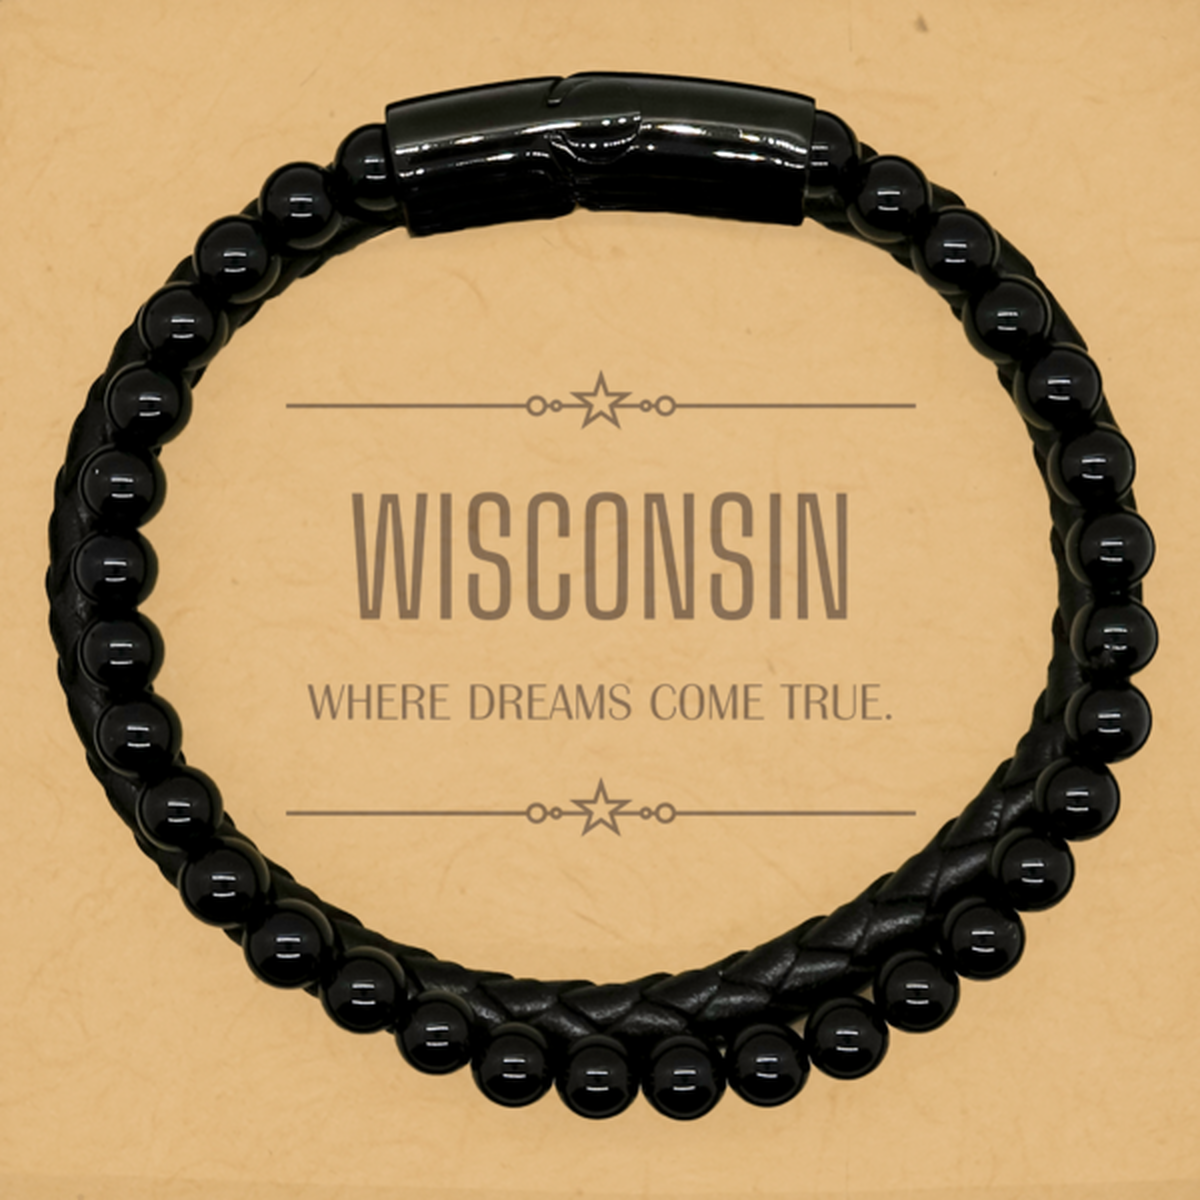 Love Wisconsin State Stone Leather Bracelets, Wisconsin Where dreams come true, Birthday Inspirational Gifts For Wisconsin Men, Women, Friends